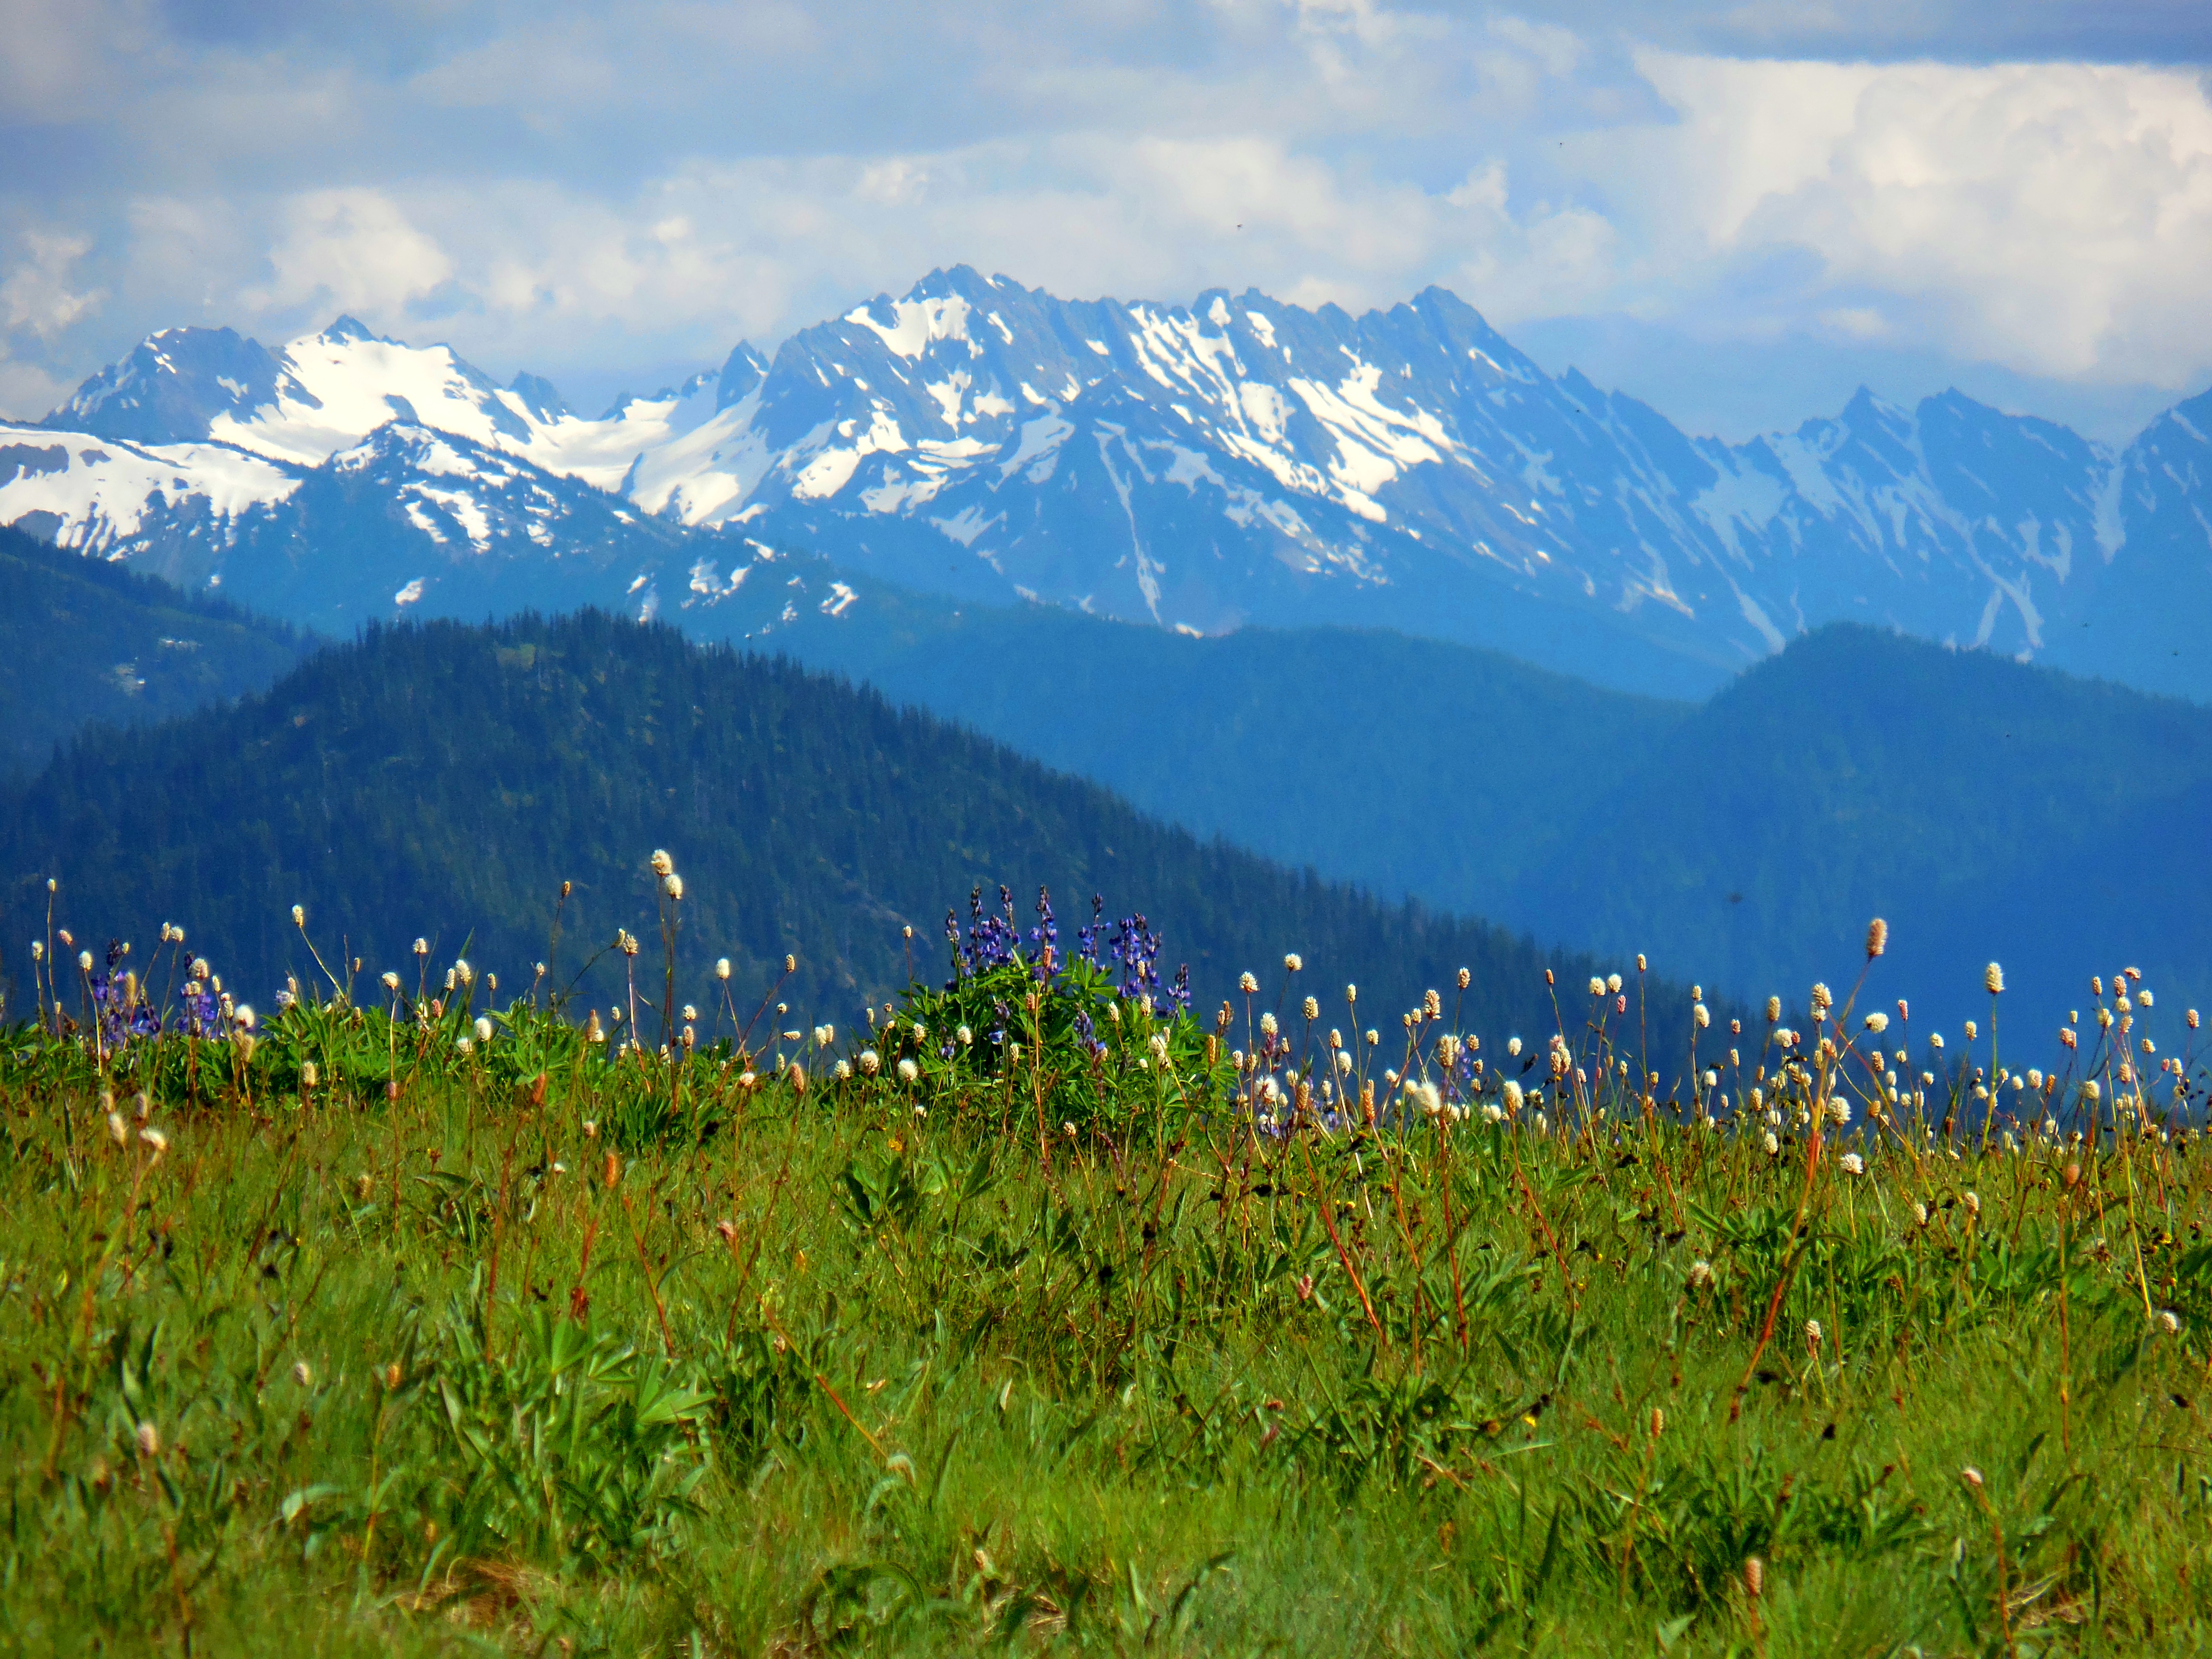 Meadow wildflowers with snowy mountain peaks in background